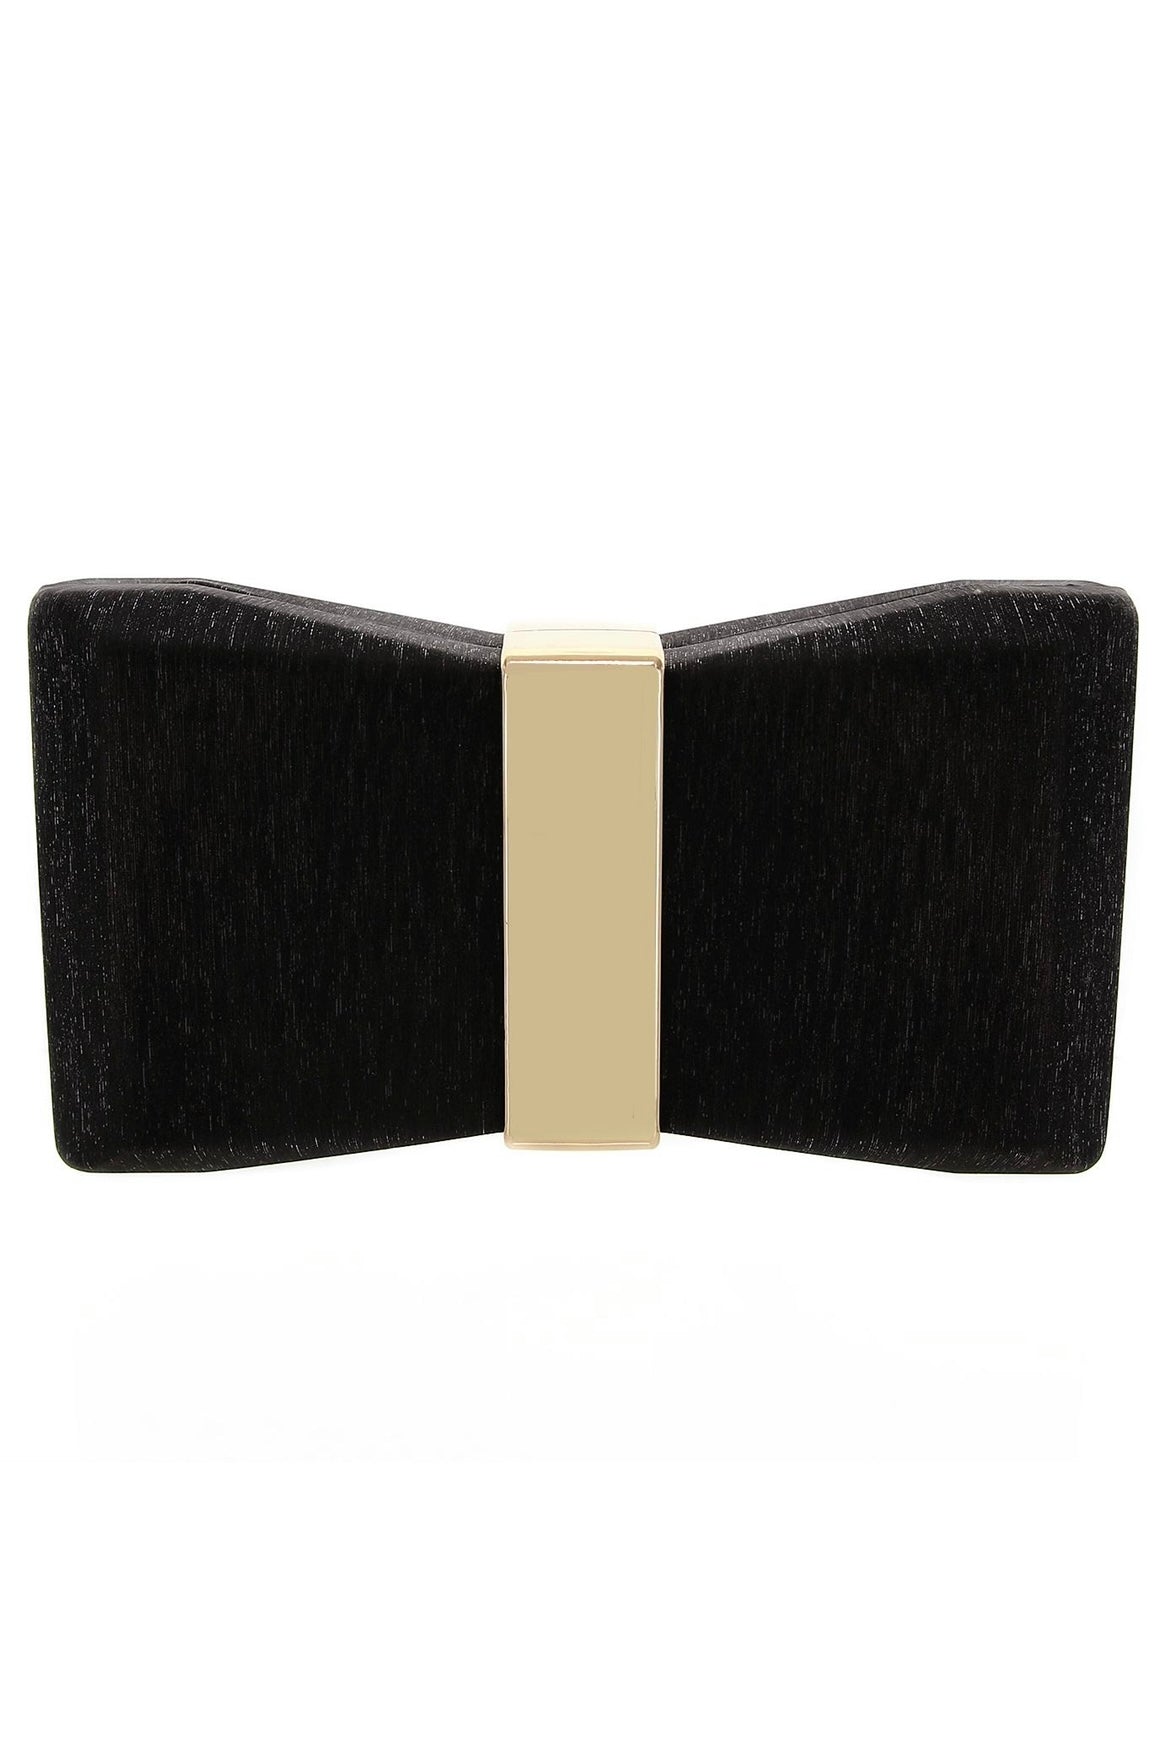 INStyle Bow Rectangular Clutch